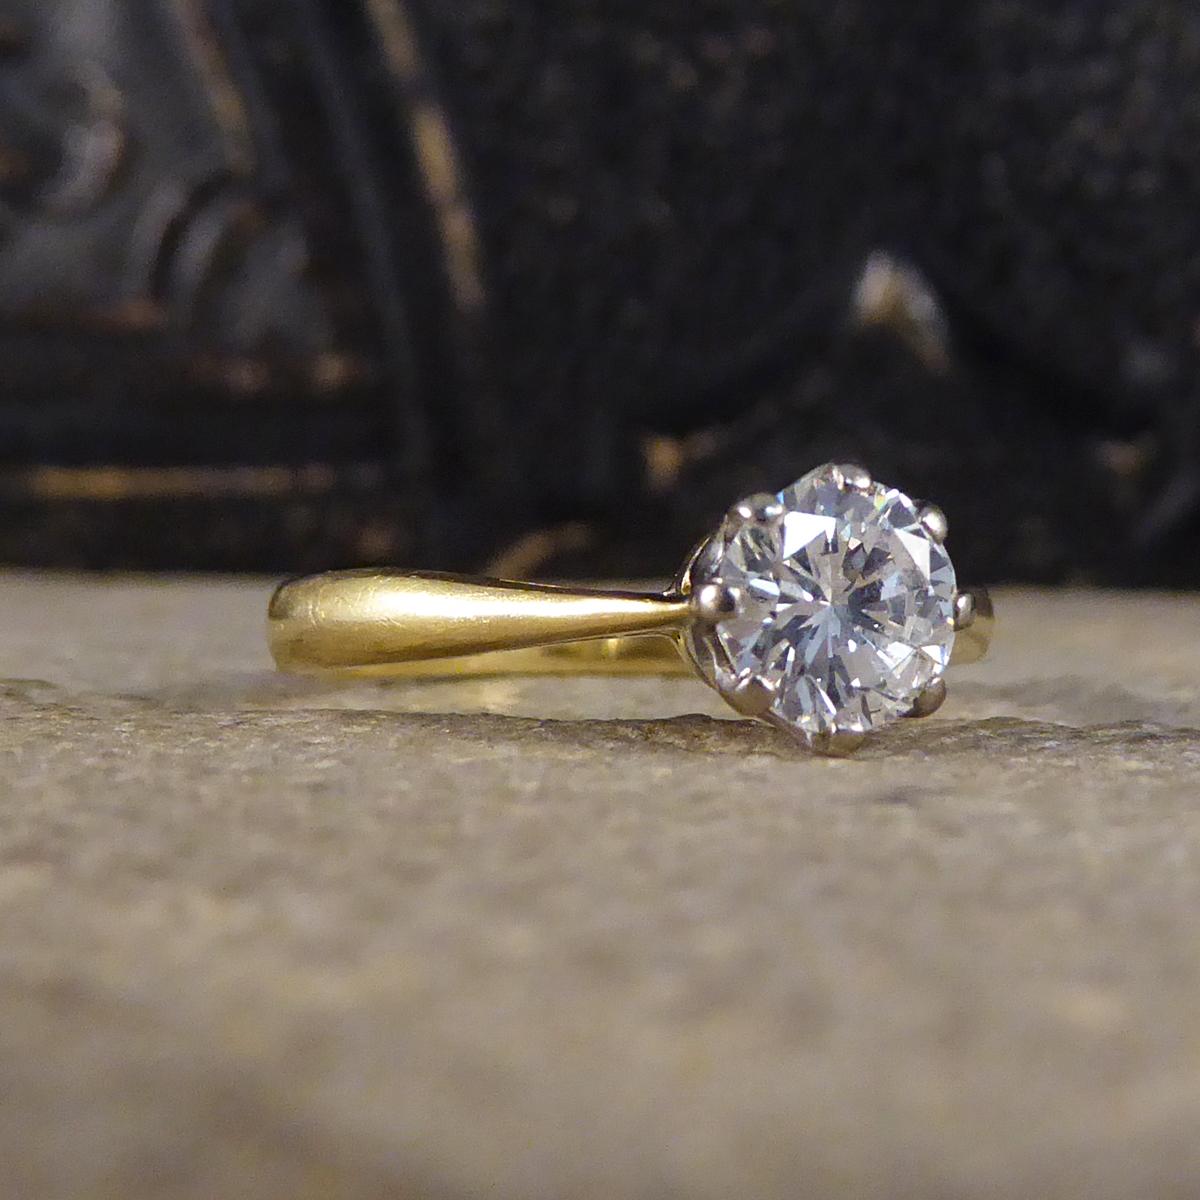 This gorgeous engagement ring holds a Brilliant cut Diamond weighing 0.70ct and is set in an 18ct White Gold eight claw setting leading down to an 18ct band fully hallmarked on the inside of the band made in 1979 in London. A classic solitaire ring